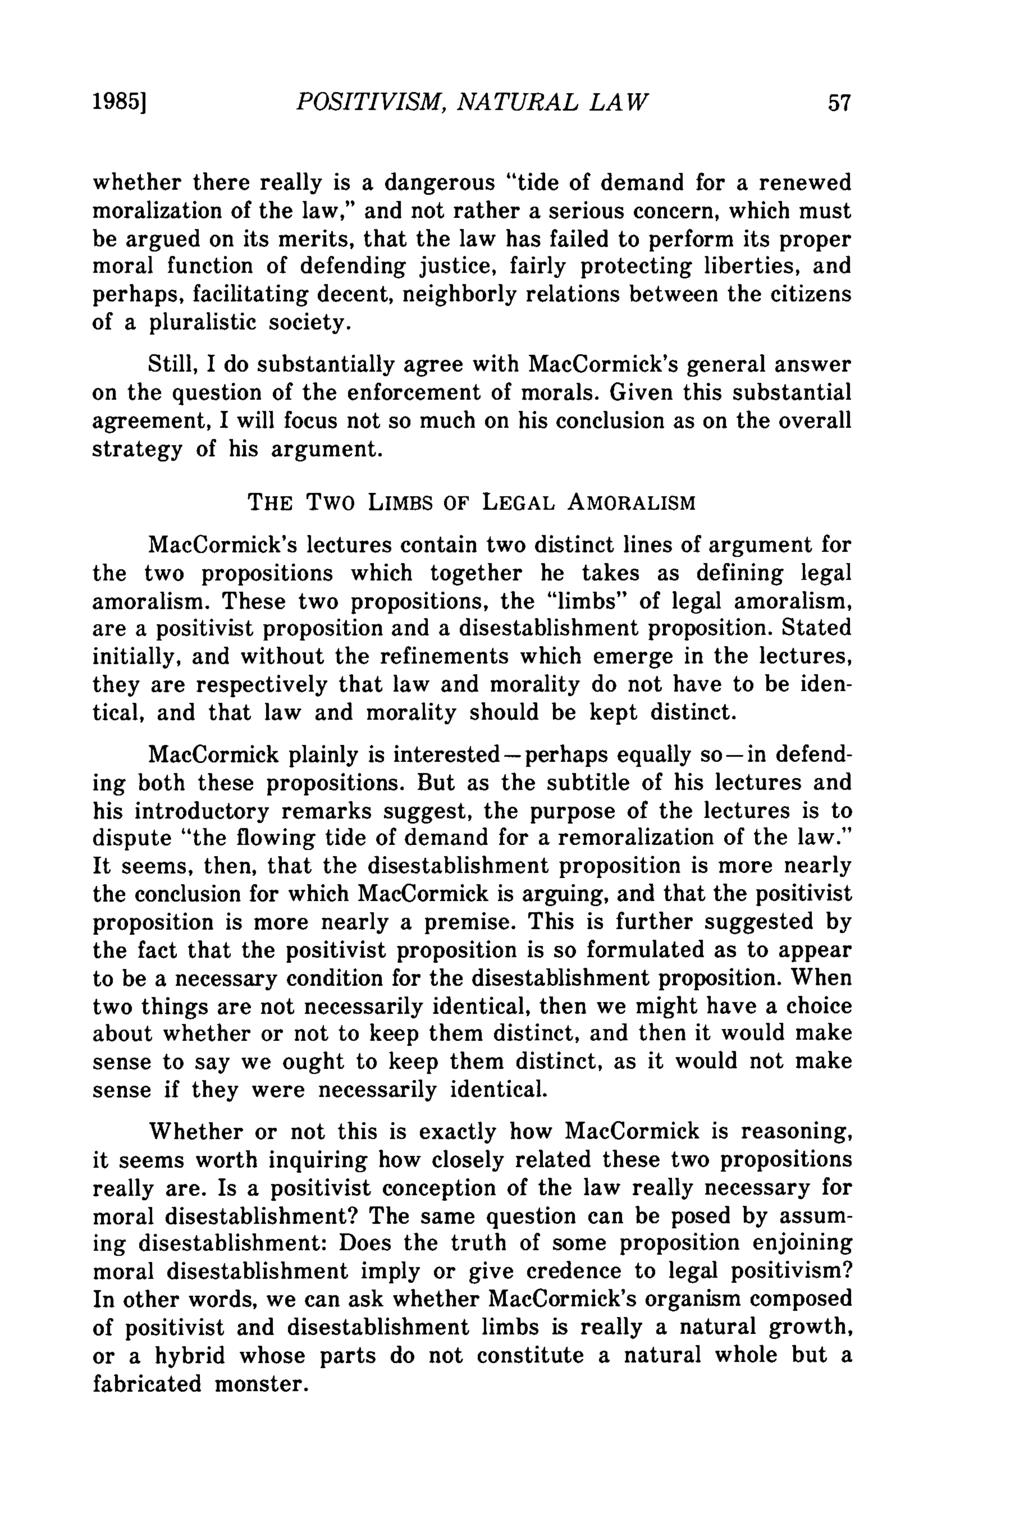 1985] Boyle: Positivism, Natural Law, and Disestablishment: Some Questions Ra POSITIVISM, NATURAL LAW whether there really is a dangerous "tide of demand for a renewed moralization of the law," and